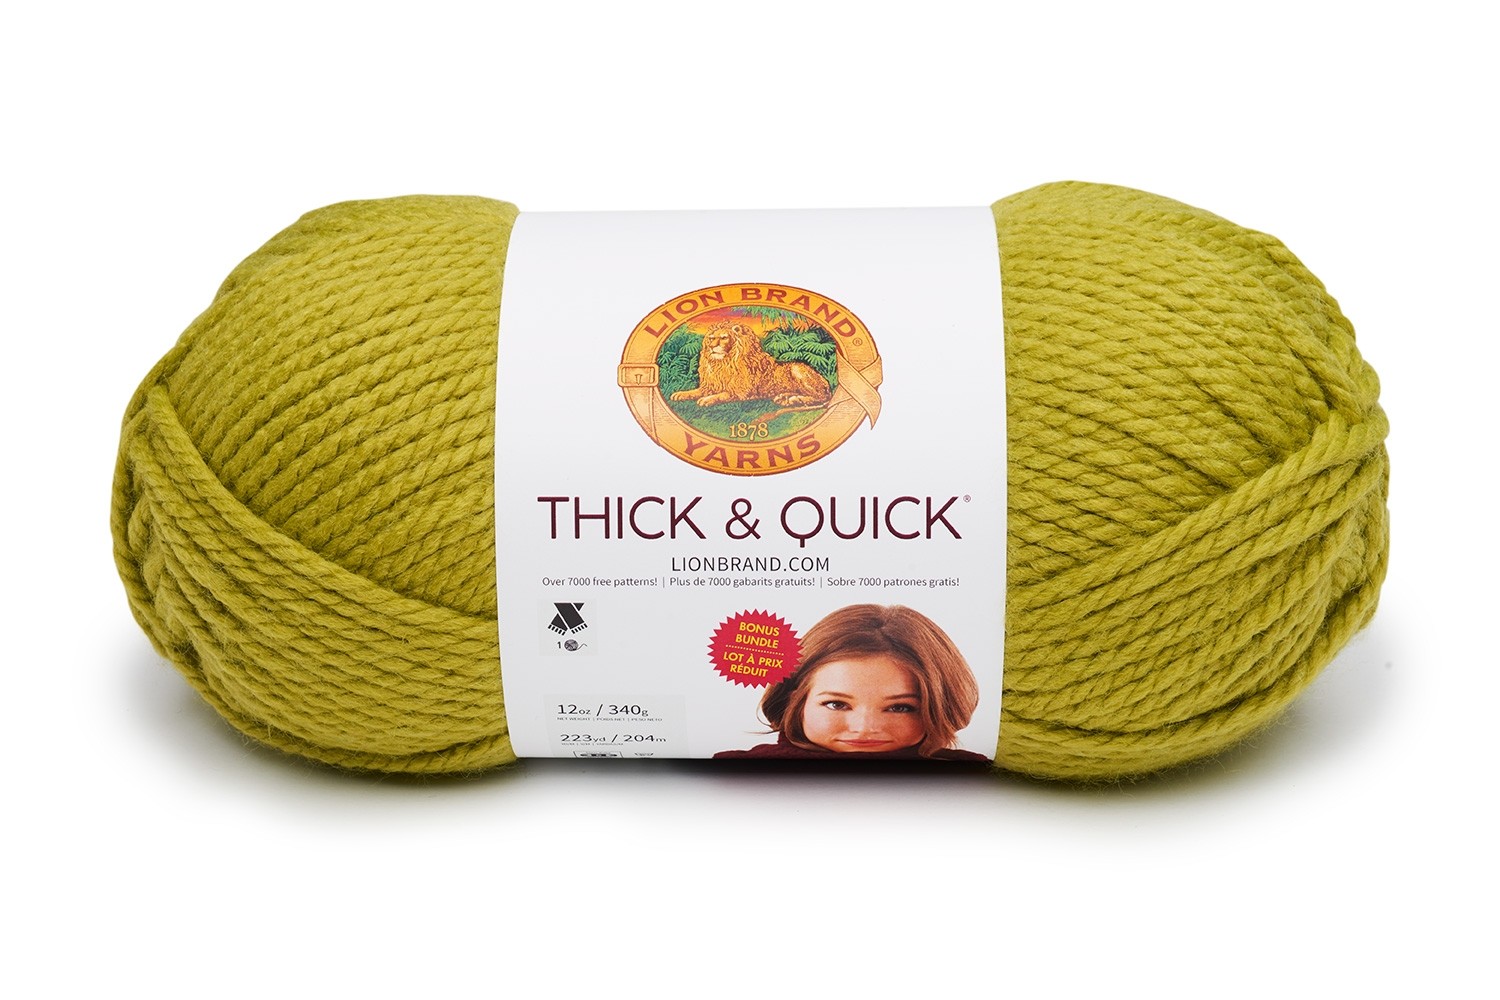 Thick & Quick in Leaf